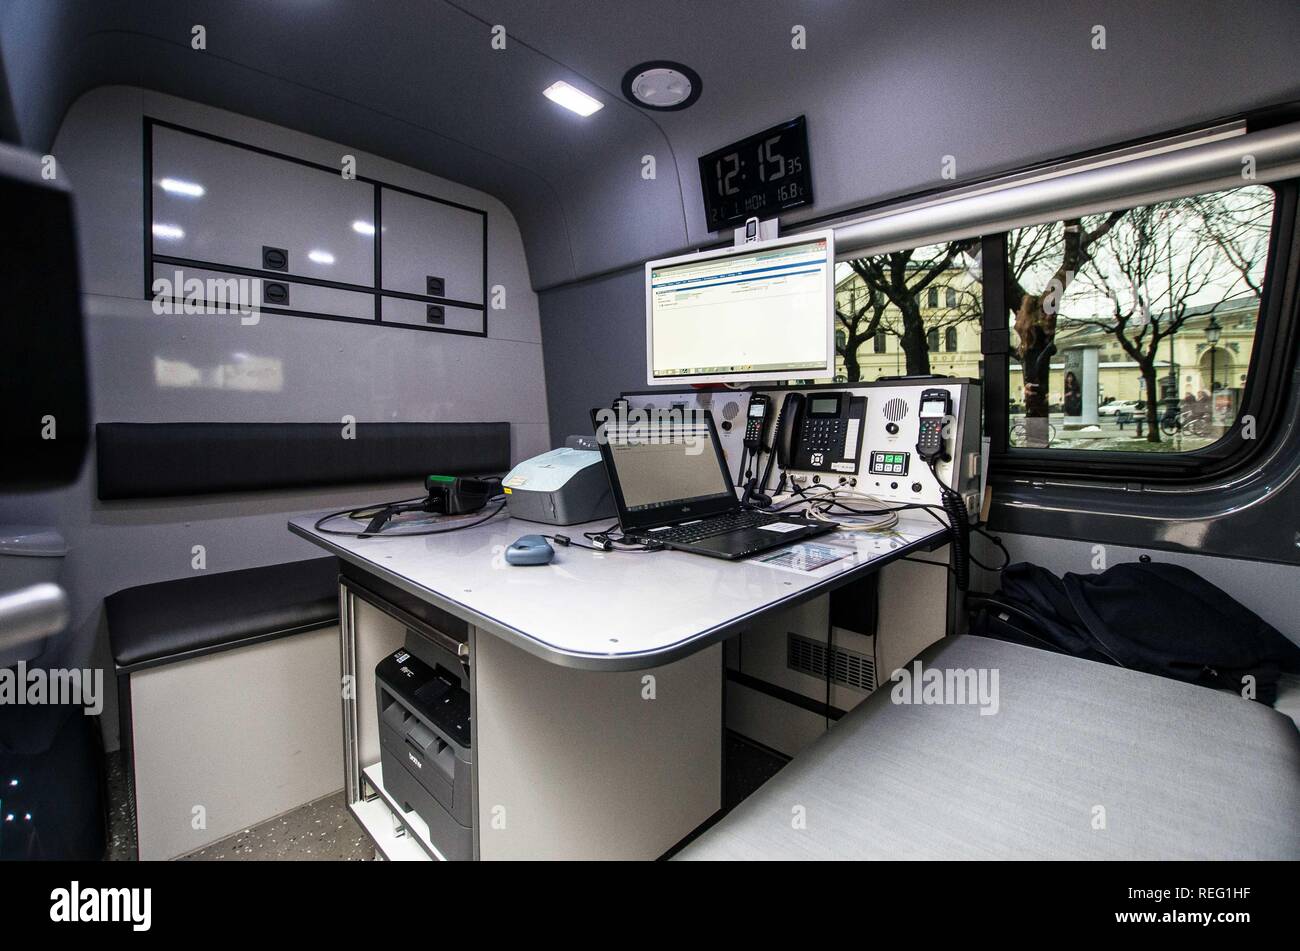 Munich, Bavaria, Germany. 21st Jan, 2019. Inside one of the mobile offices of the Bavarian Border Police, where they display the advanced communications and proofing devices they use to carry out their tasks. The Bavarian Innenminister Joachim Herrmann and the Direktor der Bayerischen Grenzpolizei Alois Mannichl presented the half year statistics of the controversial border police (Grenzpolizei) that operates at the border crossings between Germany and Austria. Herrmann announced plans to double the border protection police by 2023.m Credit: ZUMA Press, Inc./Alamy Live News Stock Photo